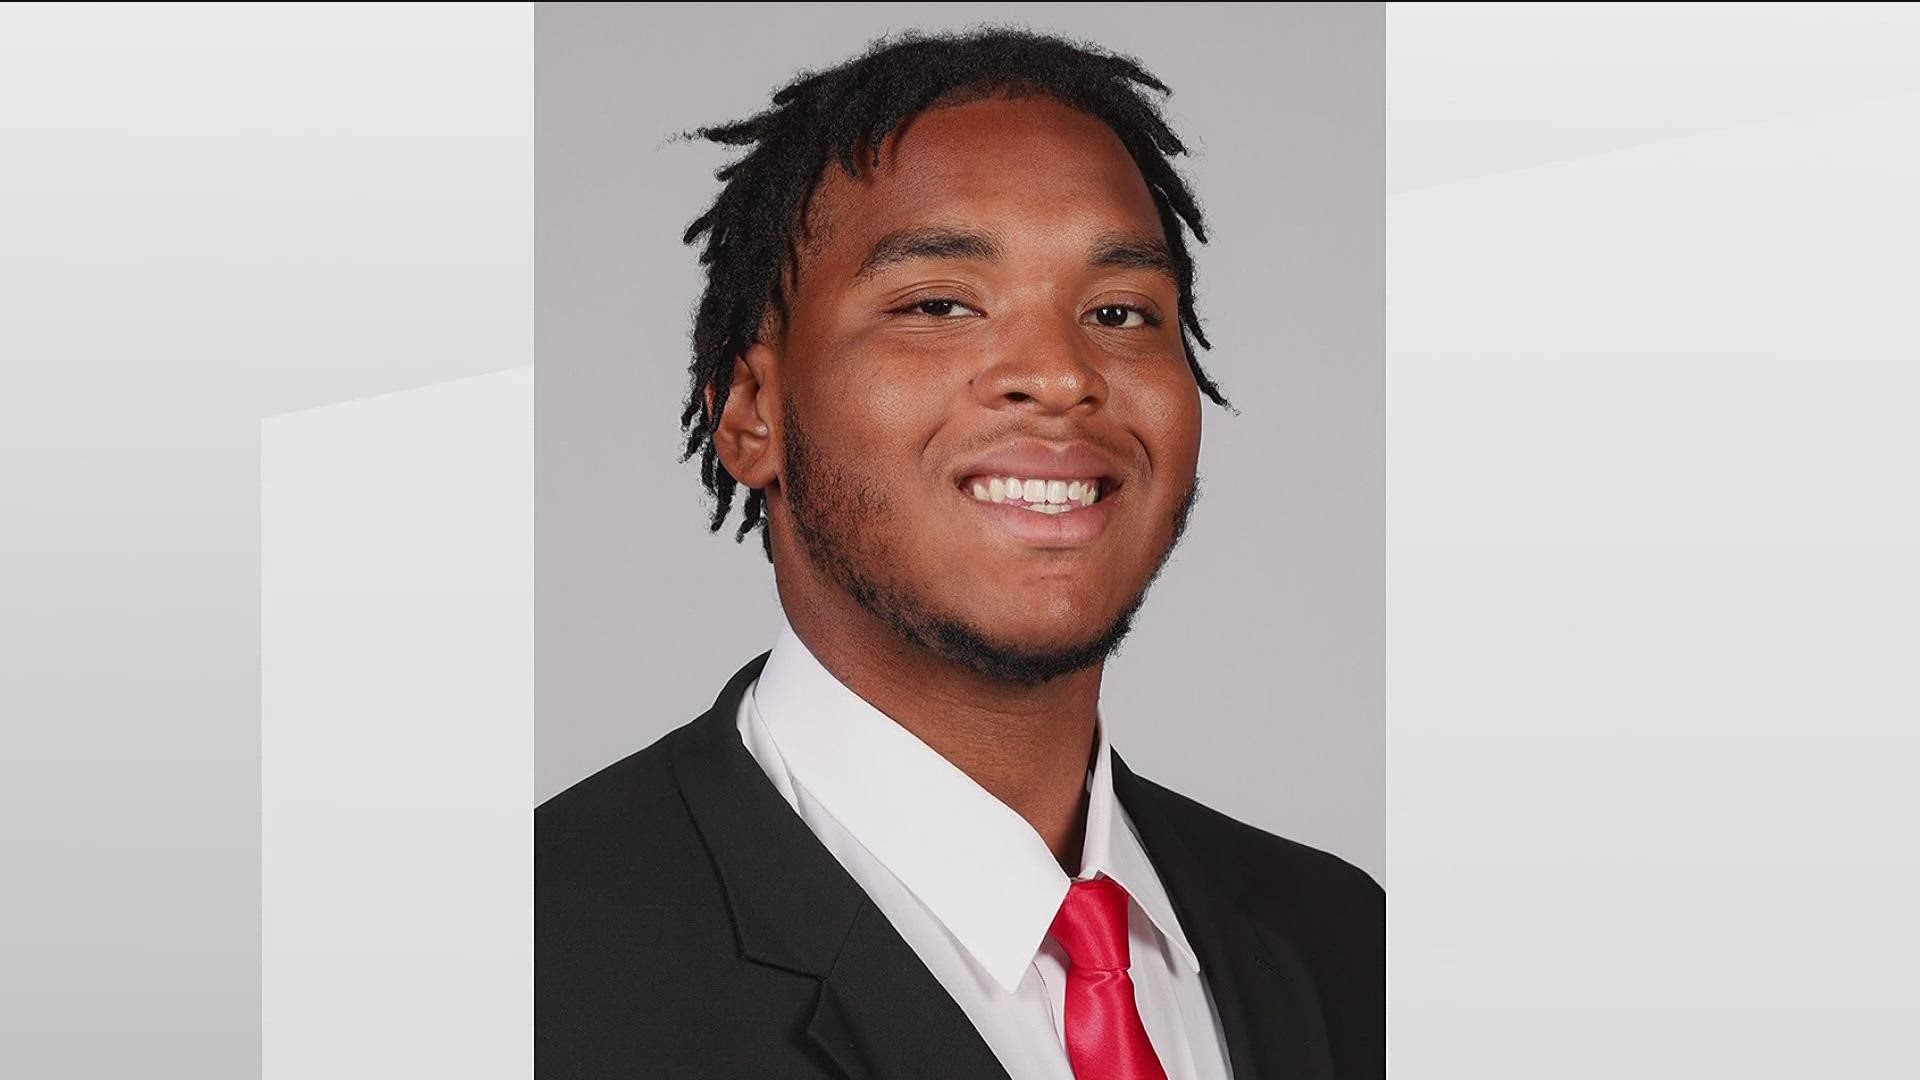 Sharlene Willock described her son as a gentle giant who loved football and was so happy when he received an offer to play for the University of Georgia.